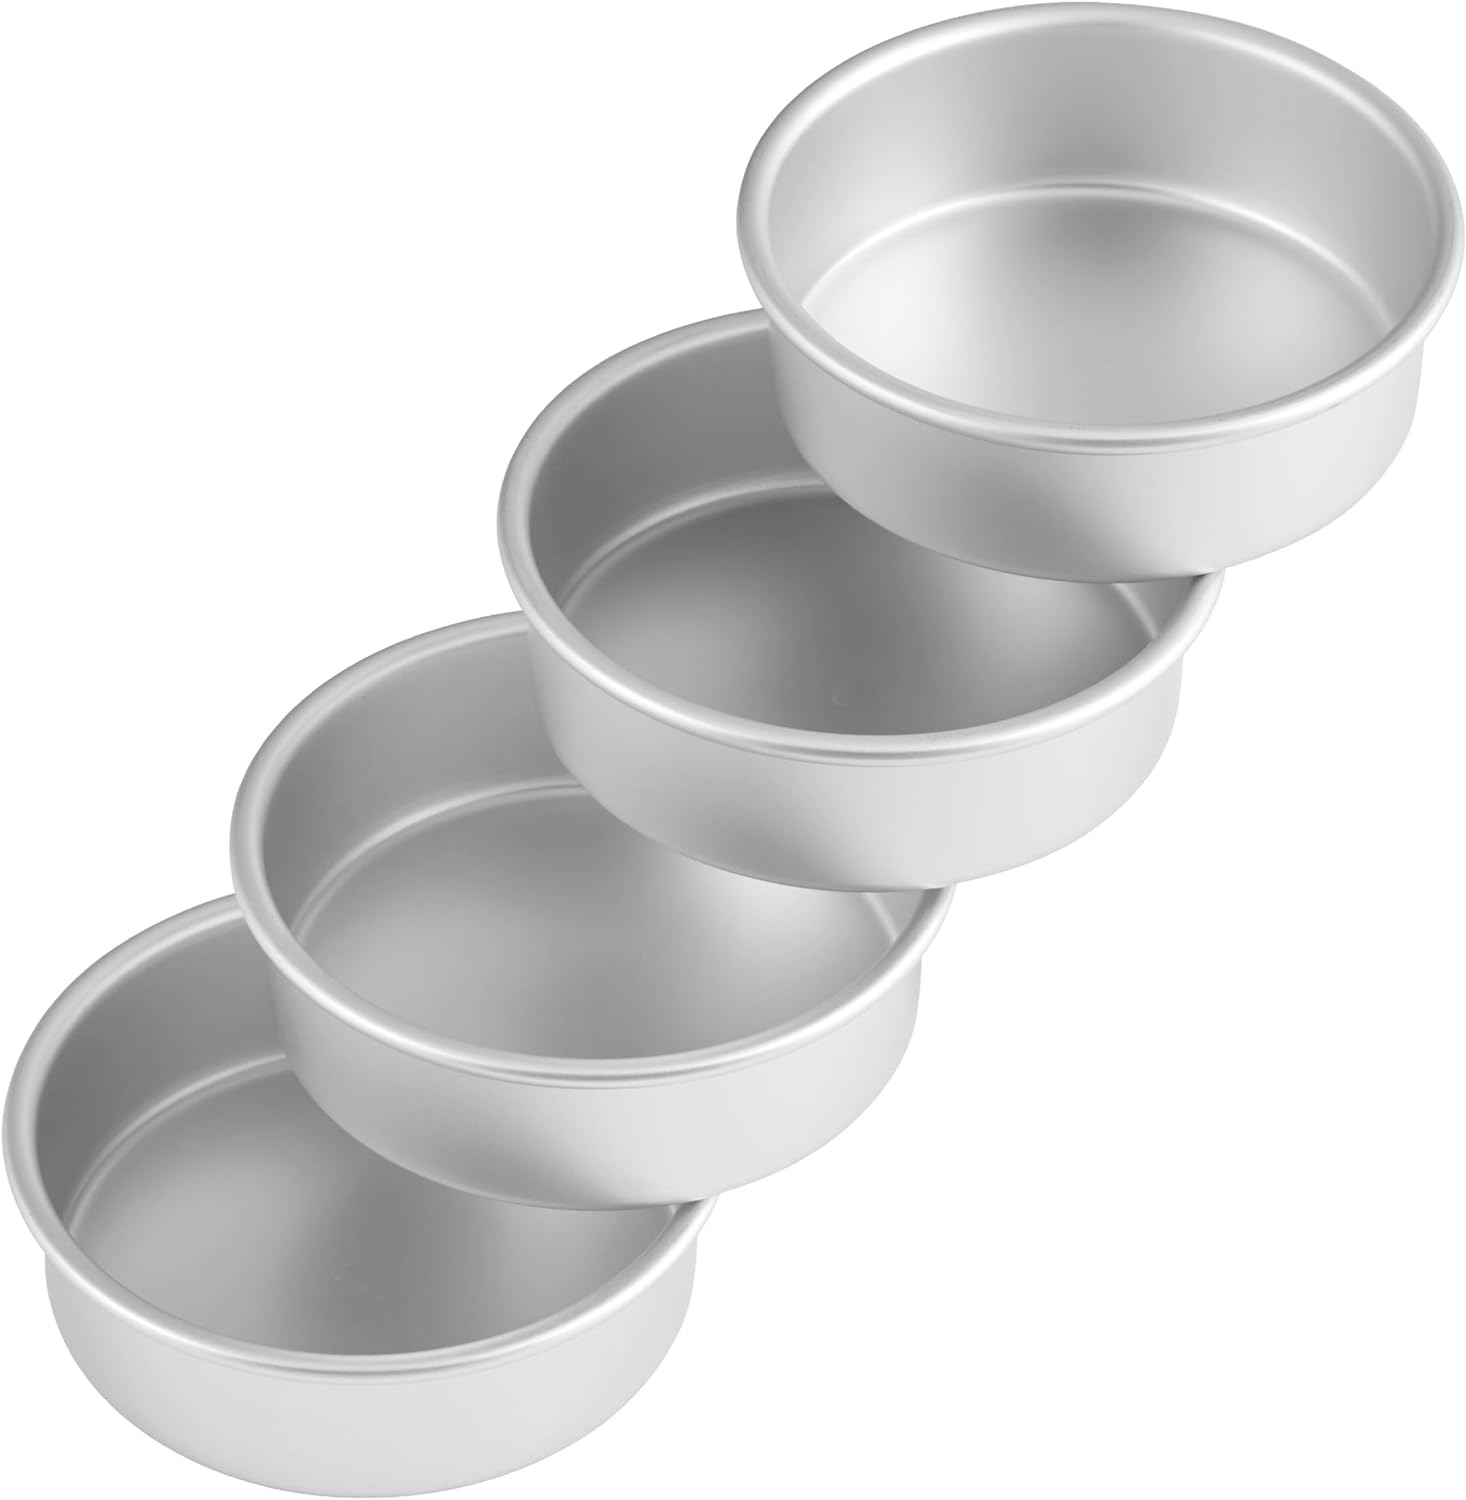 Wilton Performance Pans Aluminum round Cake Pan, 6 X 2 In., Pack of 4)